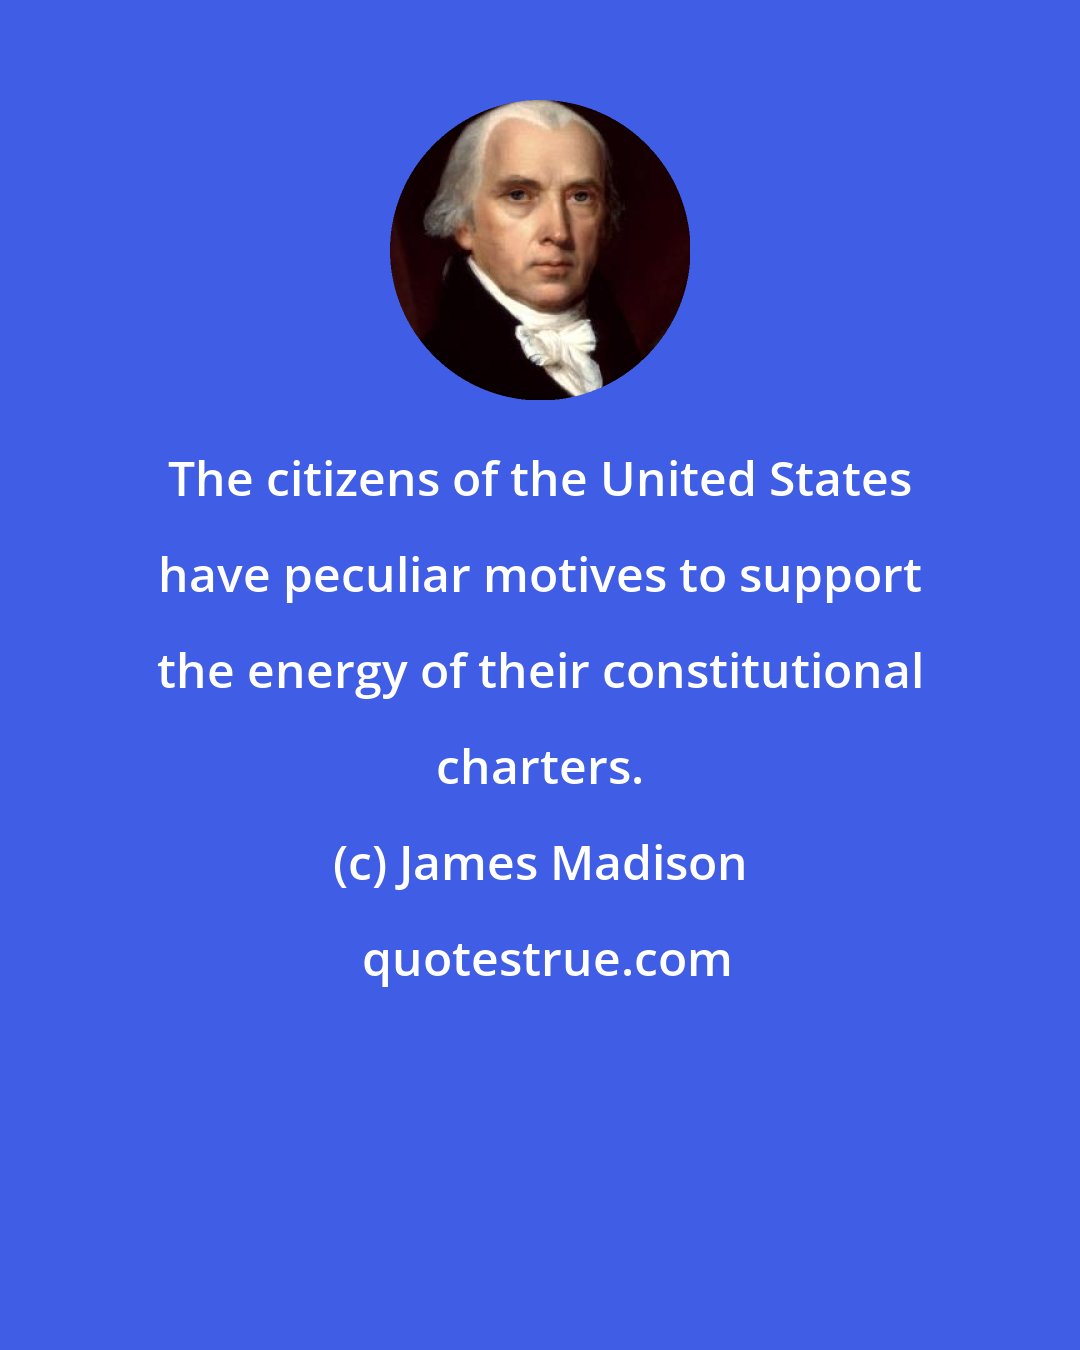 James Madison: The citizens of the United States have peculiar motives to support the energy of their constitutional charters.